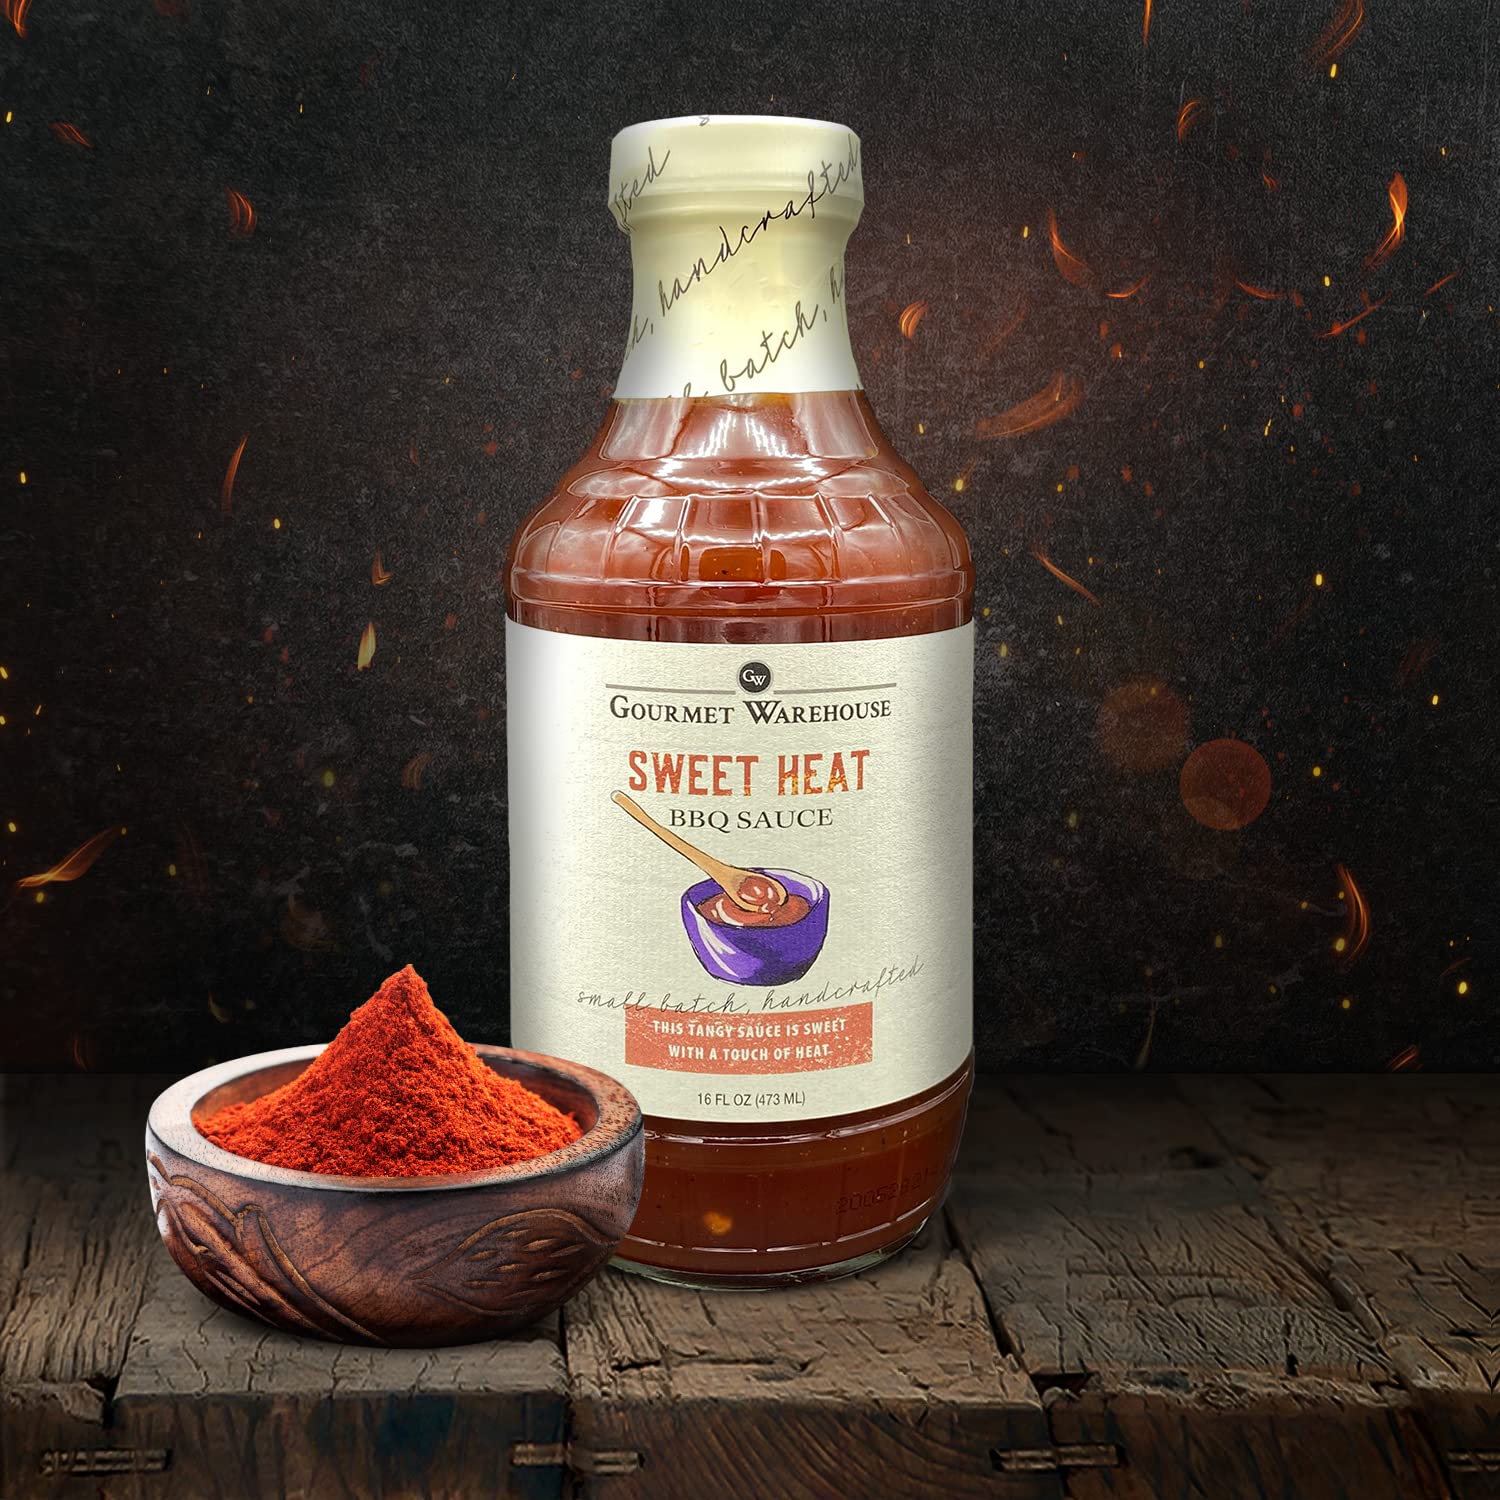 Bring the heat to your next BBQ with homemade hot sauce! Our Hot Sauce Kit  includes everything you need to make 2 unique sauces (2 bottles…